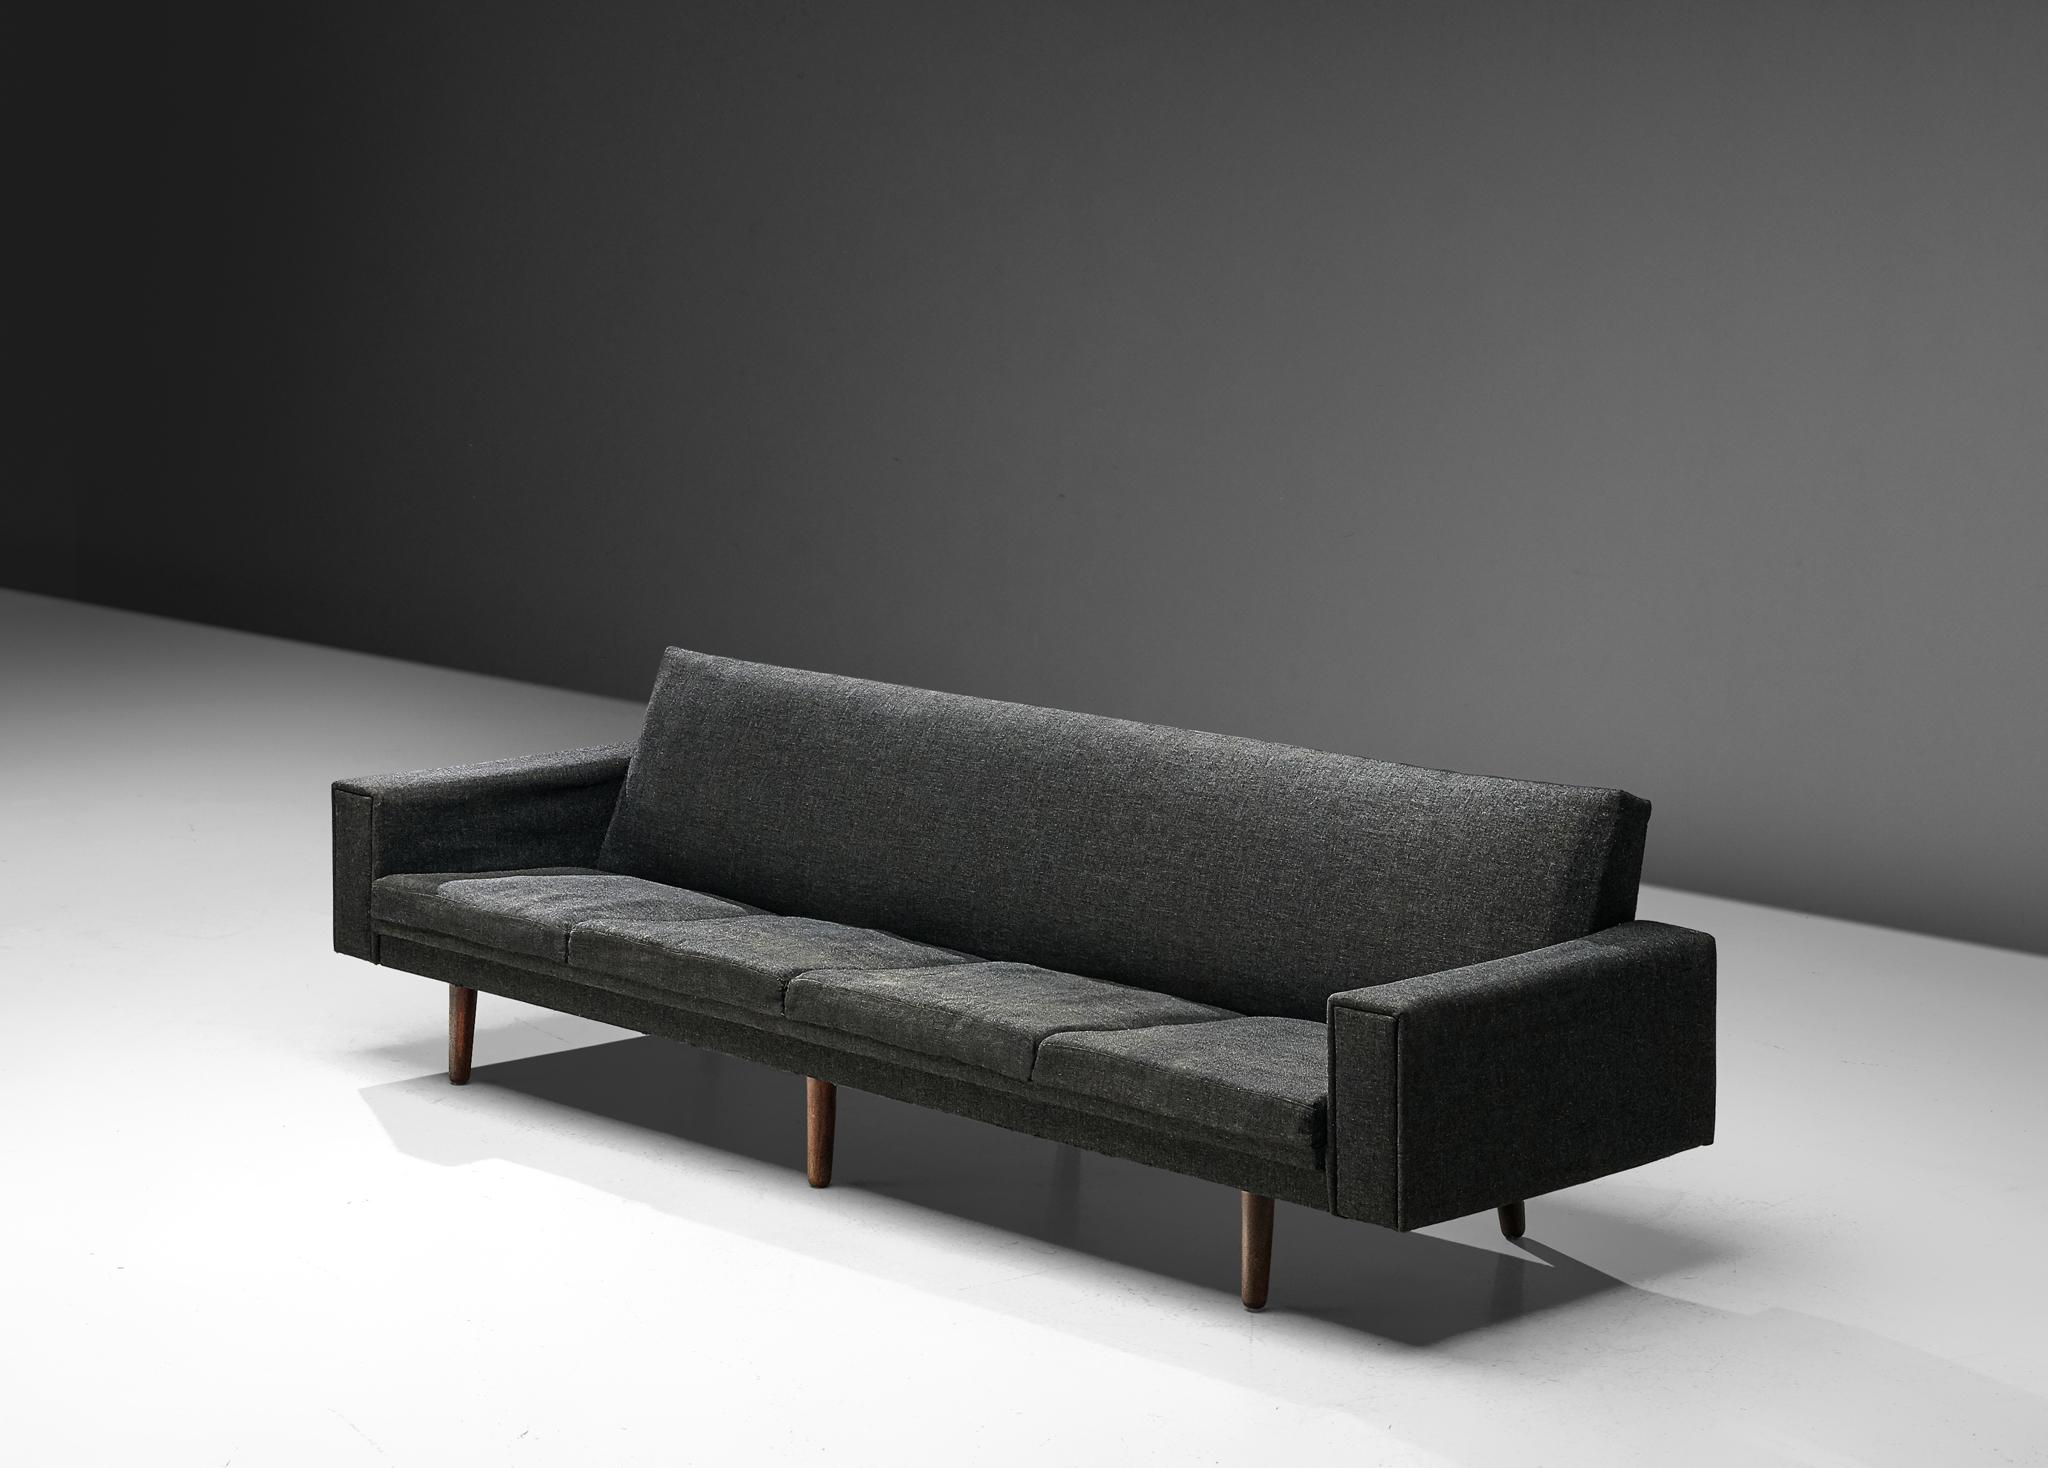 Sofa, fabric, wood, Denmark, 1960s

This well-executed sofa convinces visually through the well-balanced appearance and the stabile construction. The corpus is based on understated simplicity where clear, sharp lines are allowed to emerge in the